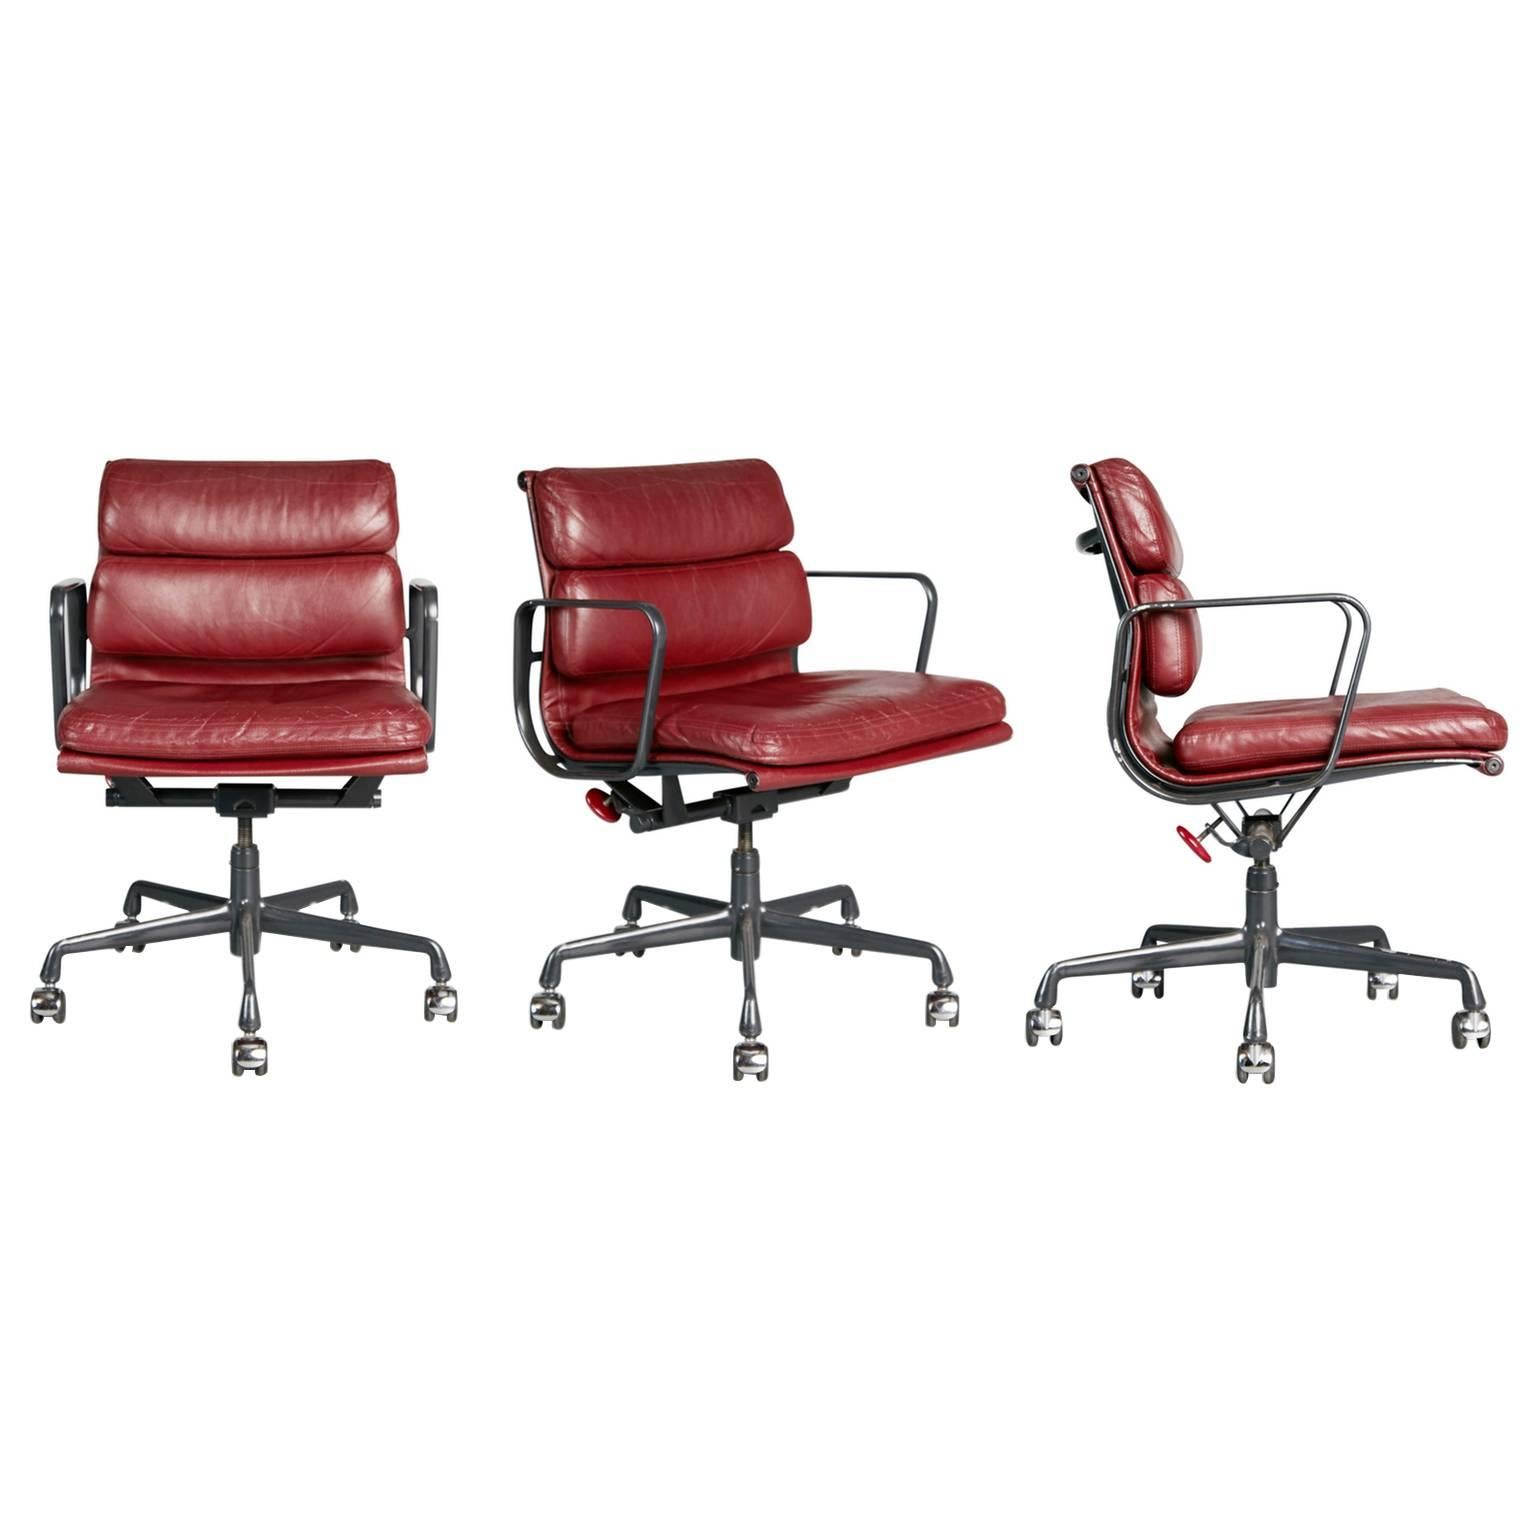 Charles Eames for Herman Miller Burgundy Soft Pad Management Chairs, circa 1980